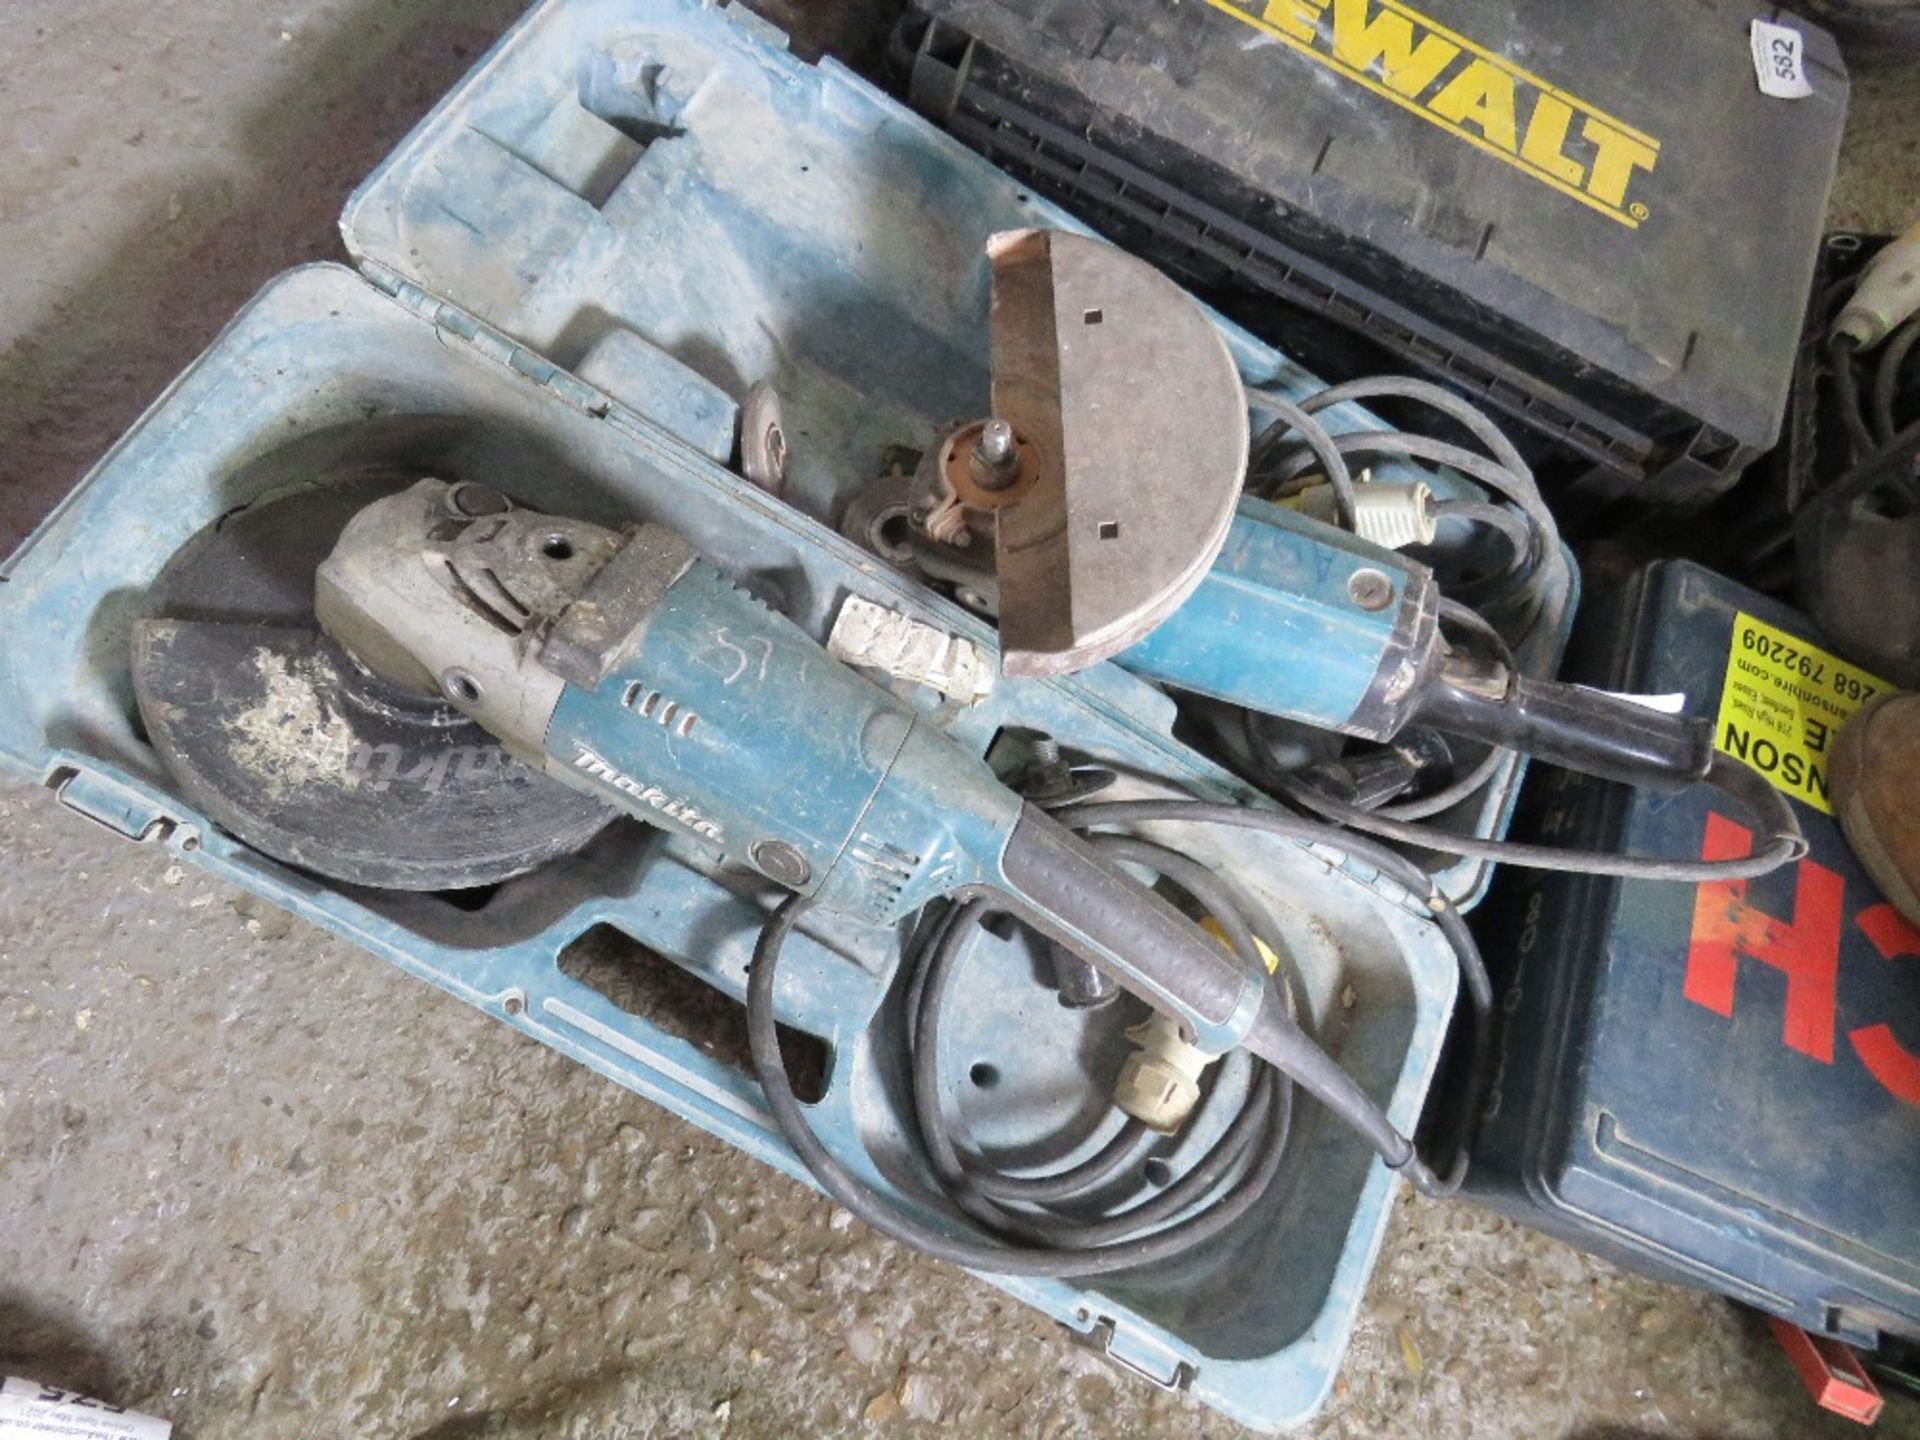 2 X 110VOLT ANGLE GRINDERS. UNTESTED, CONDITION UNKNOWN. - Image 2 of 2